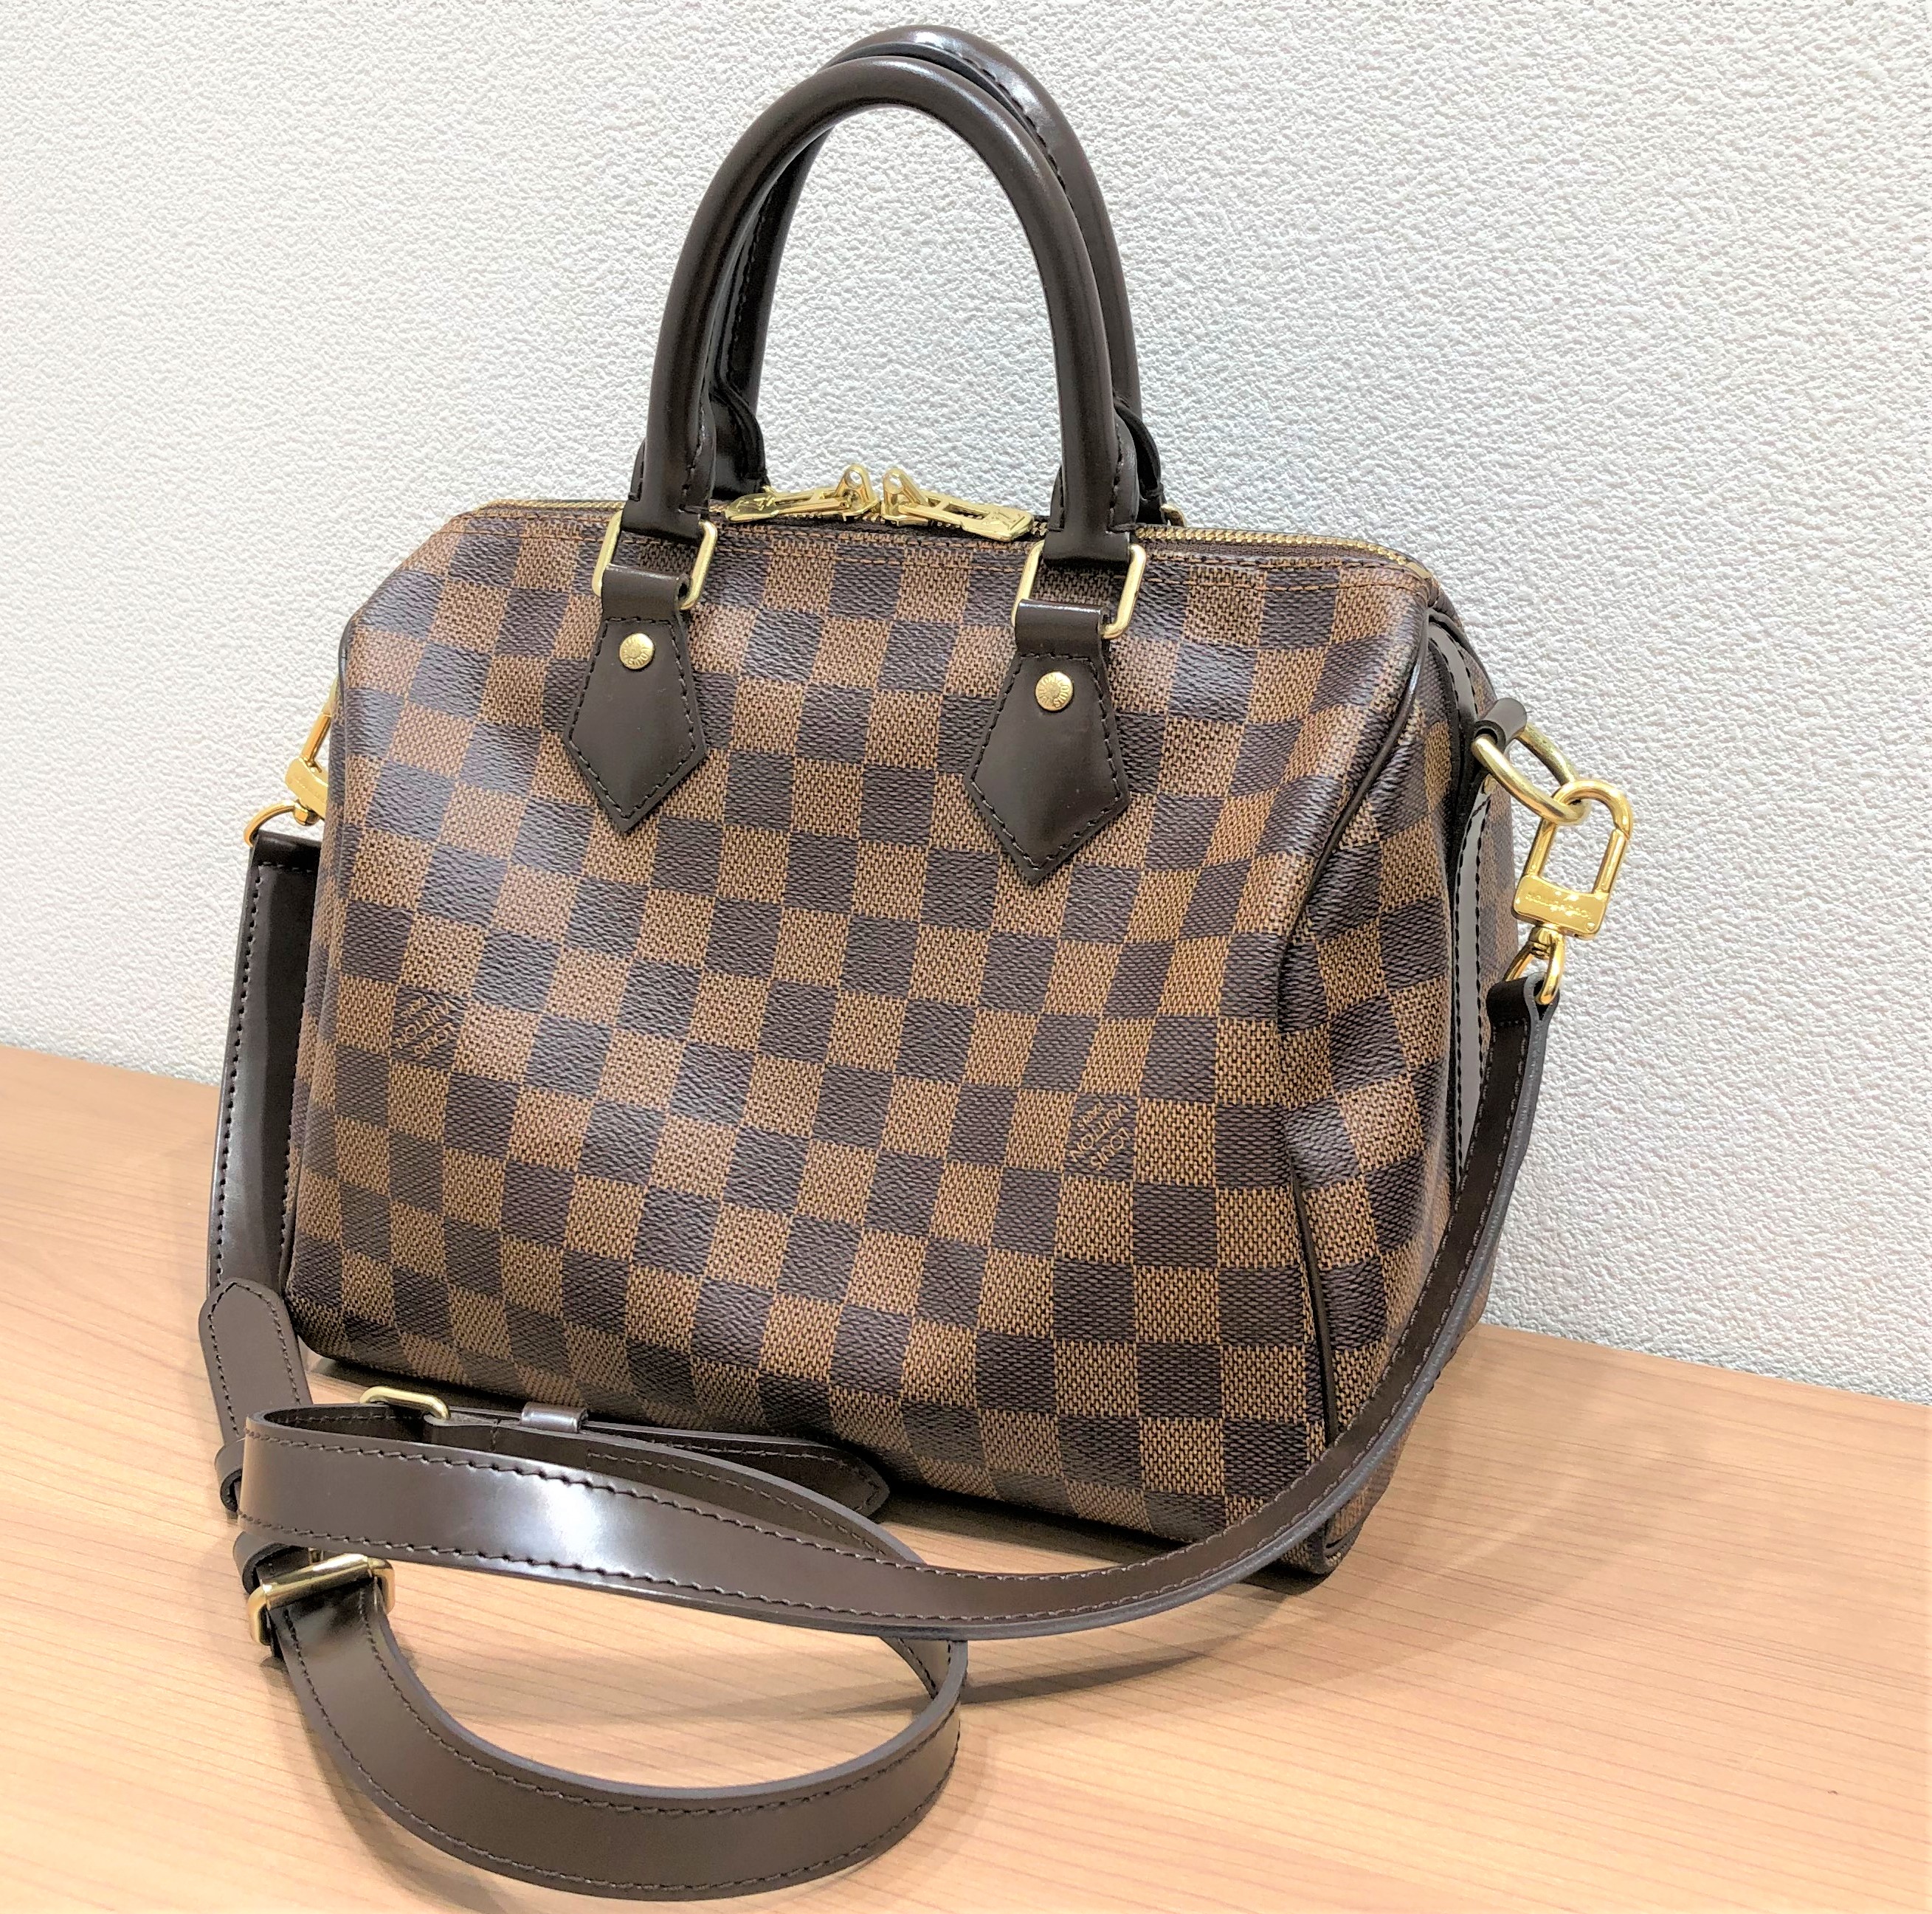 【LOUIS VUITTON/ルイヴィトン】ダミエ スピーディバンドリエール25 N41367 2WAYバッグ